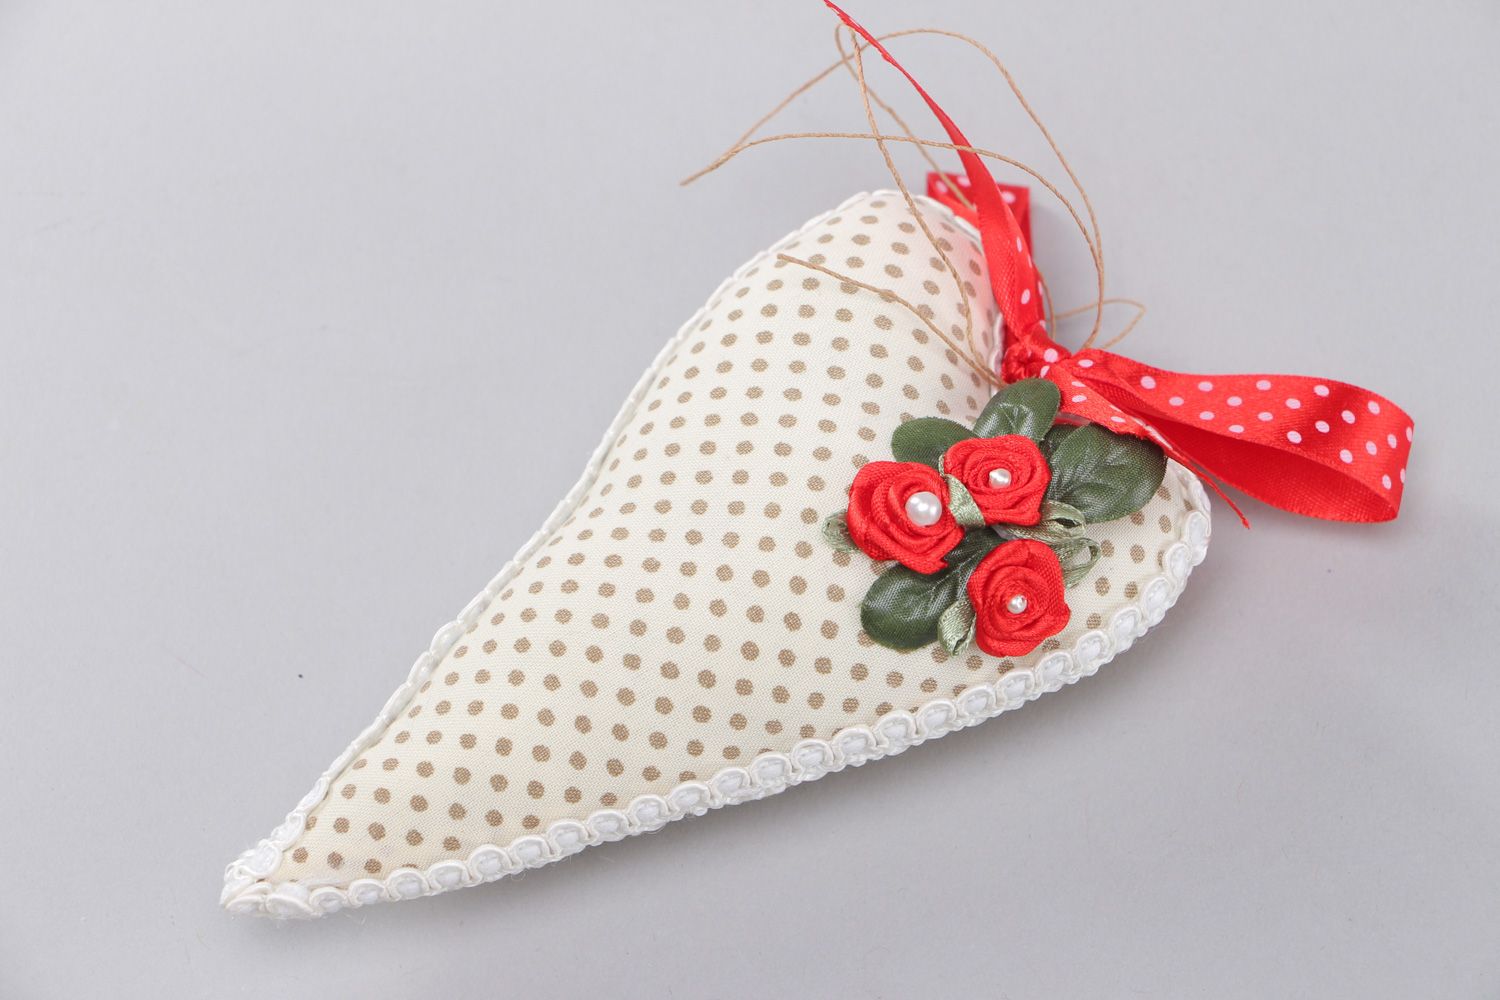 Handmade polka dot soft heart interior pendant with red flowers for home decor  photo 1